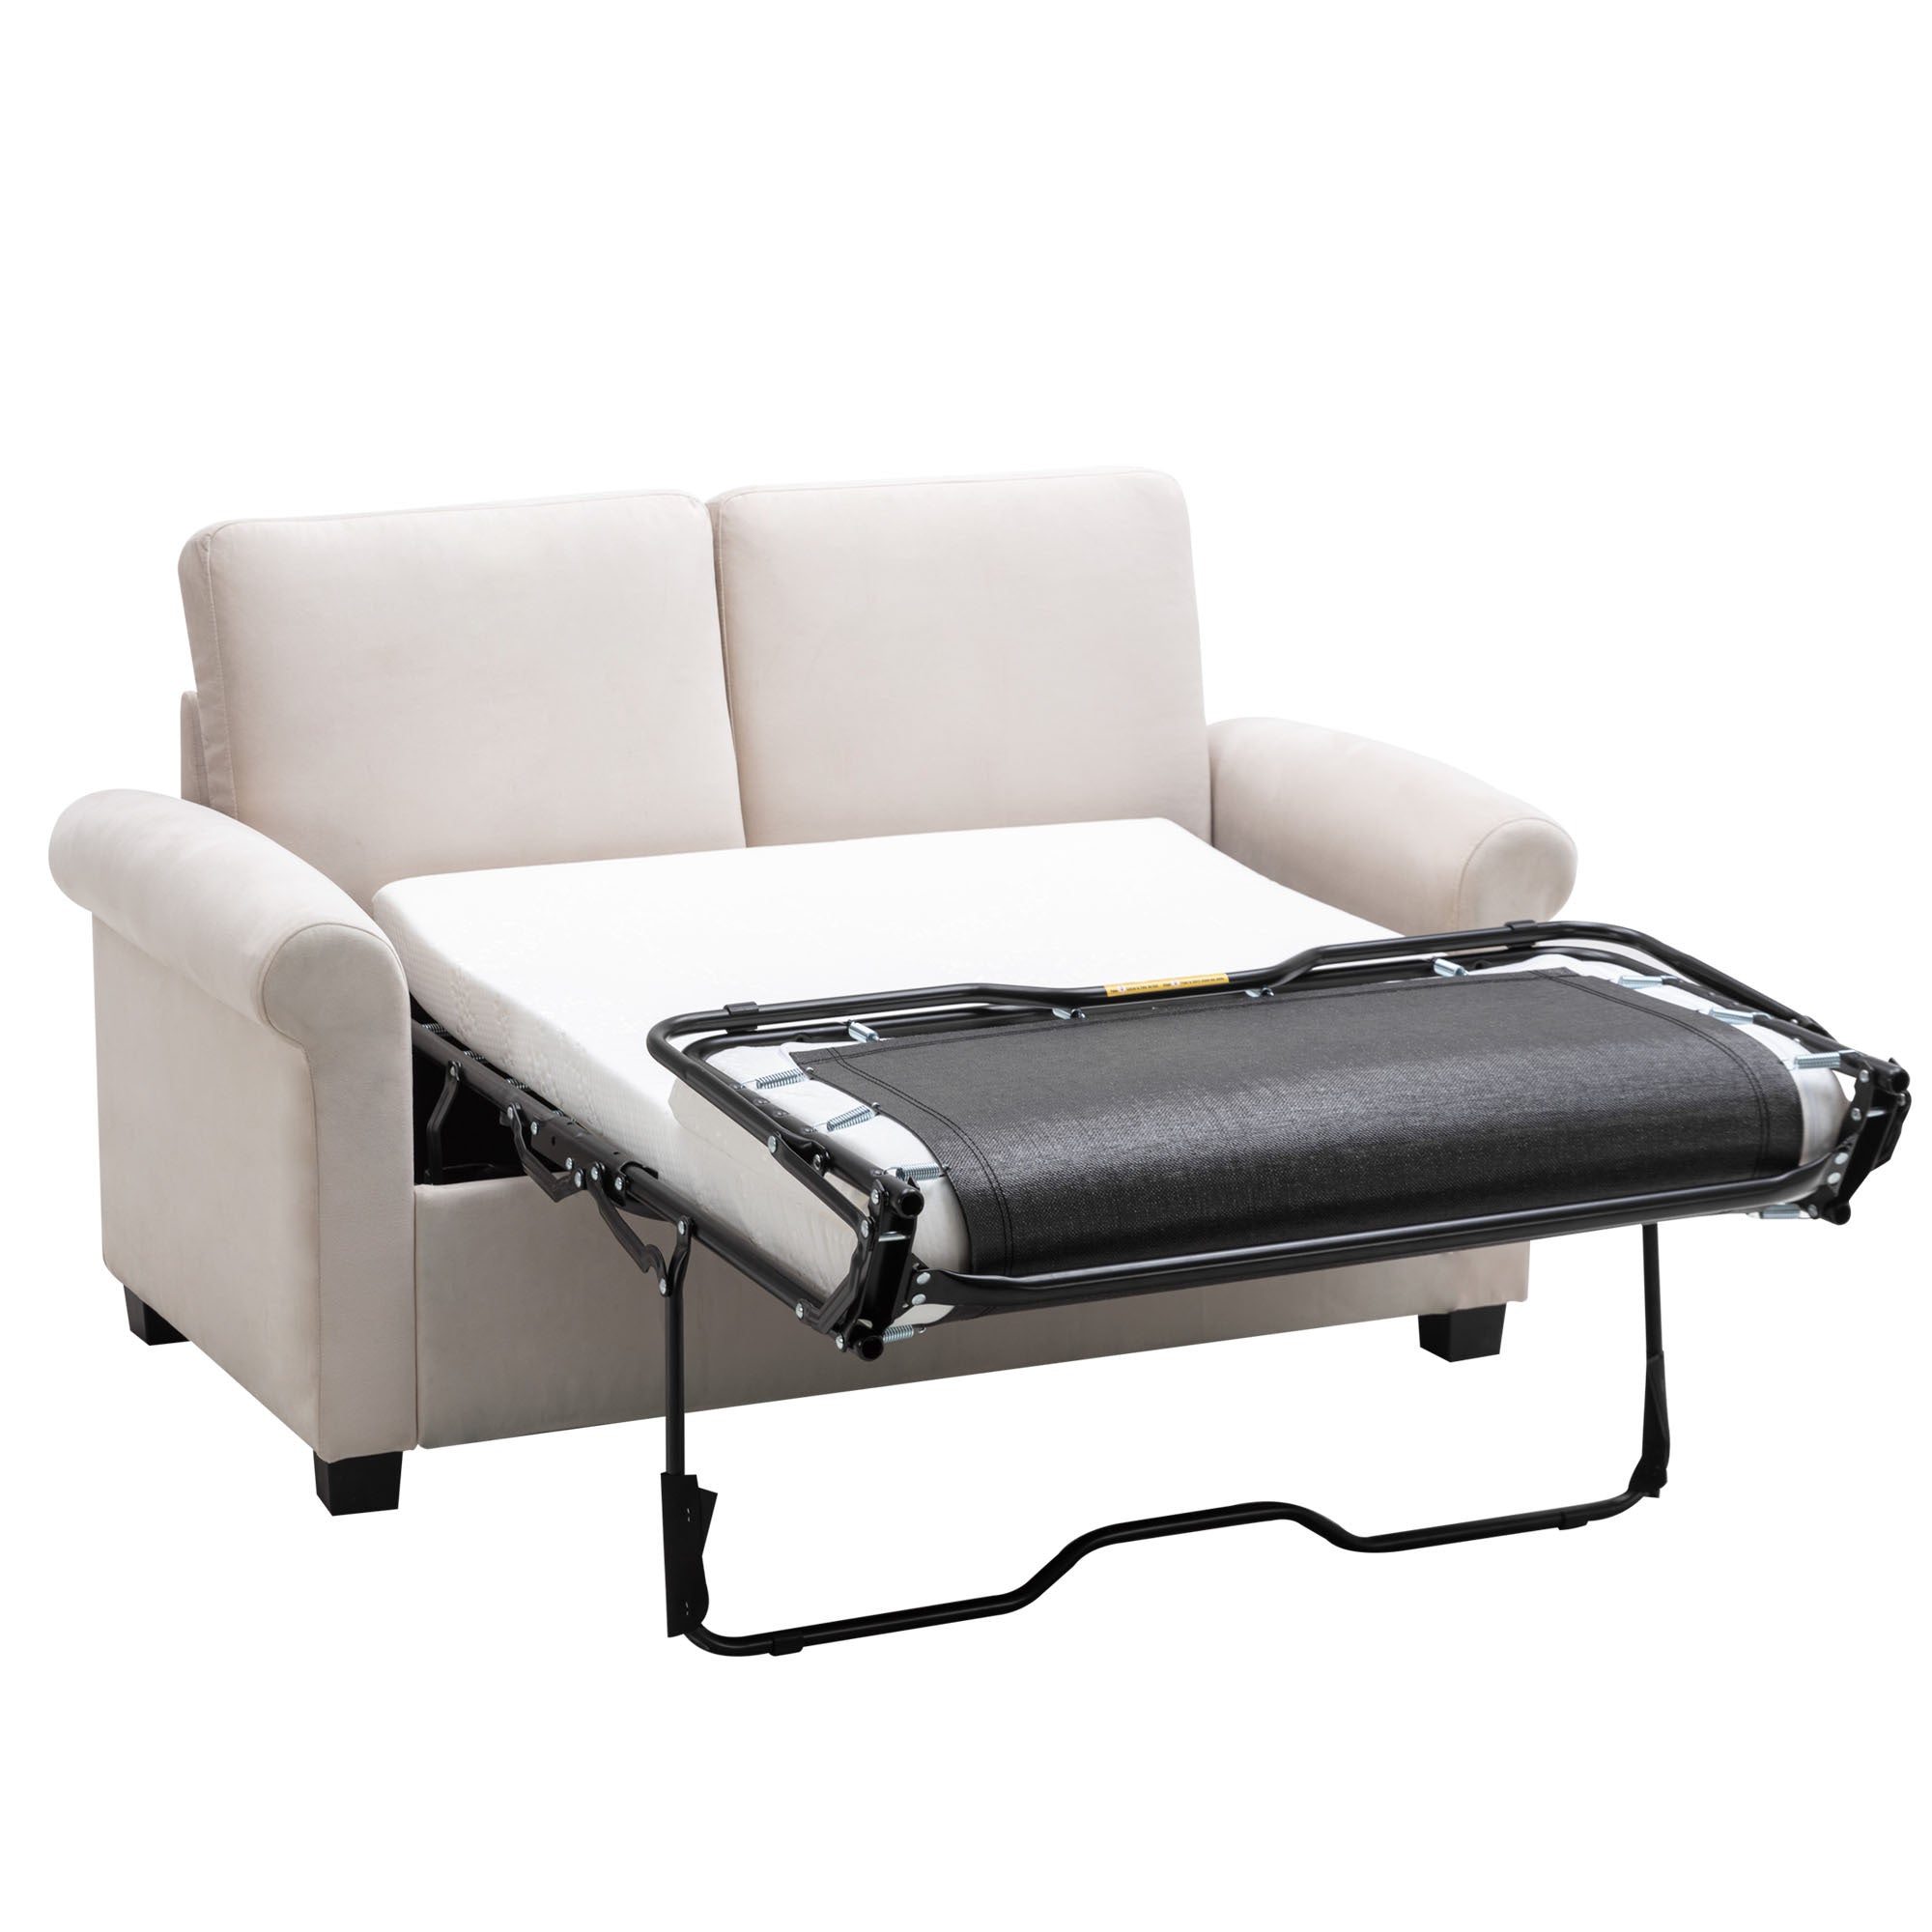 58.3" Pull Out Sofa Bed,Sleeper Sofa Bed with Premium white-foam-velvet